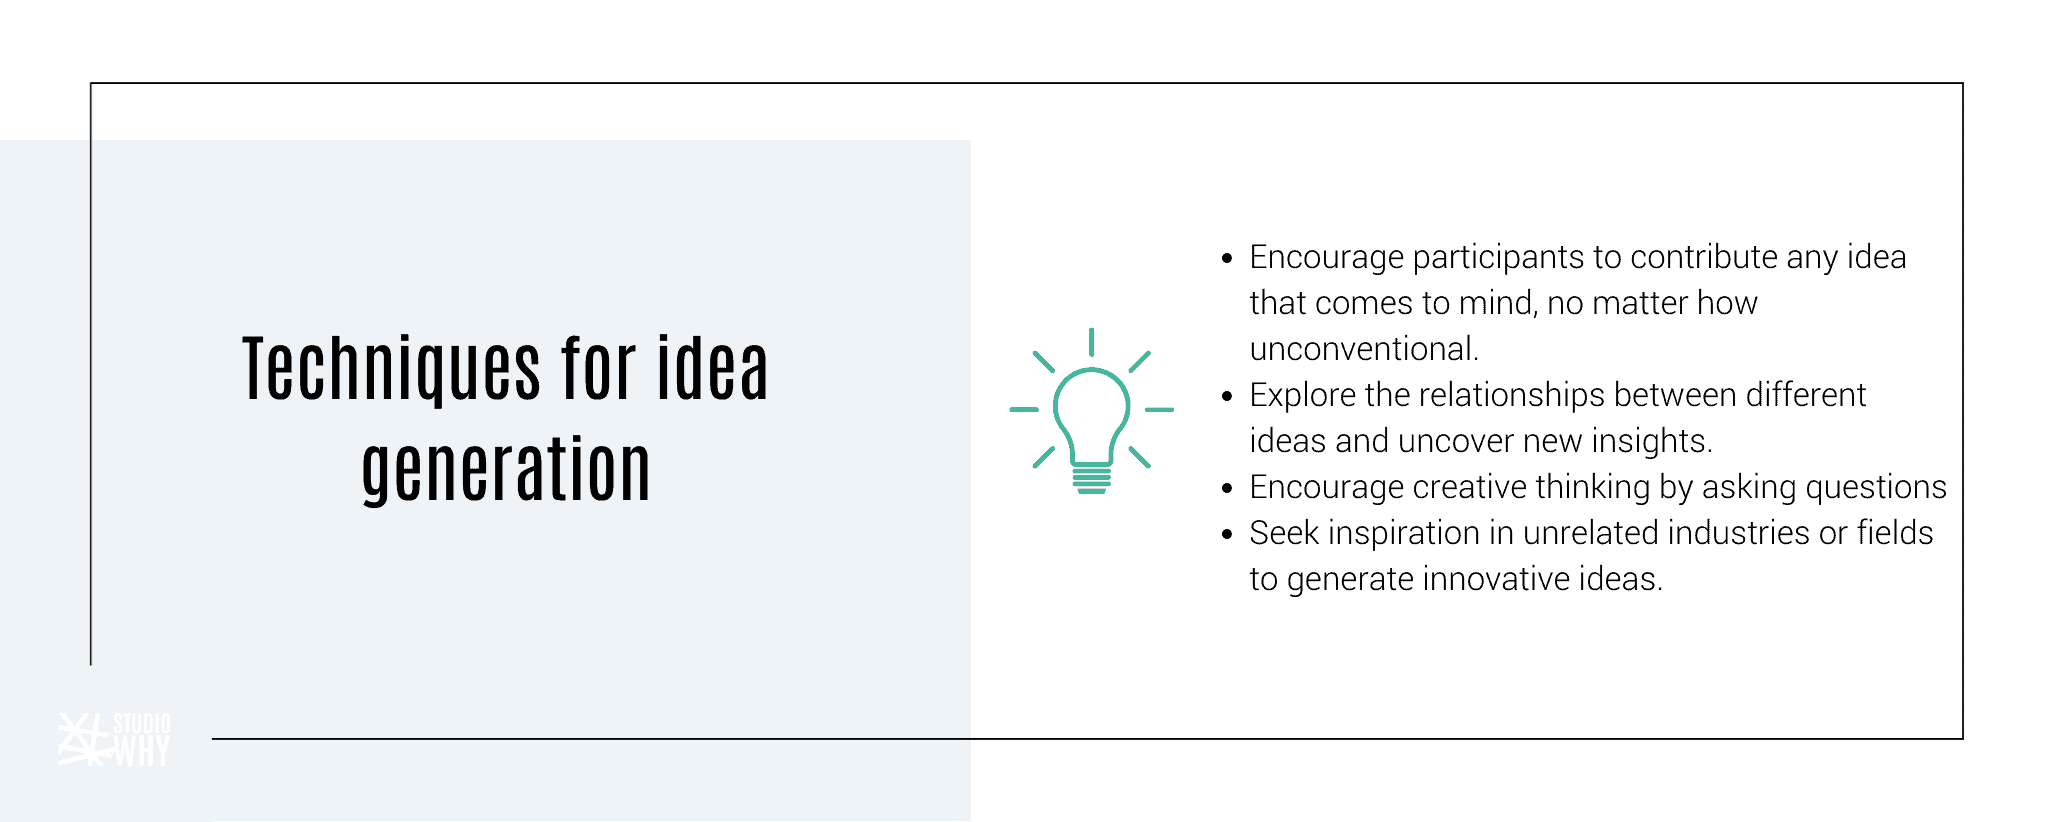 New Ideas – Strategies and Techniques - Inspiring Innovation Through  Creative Thinking